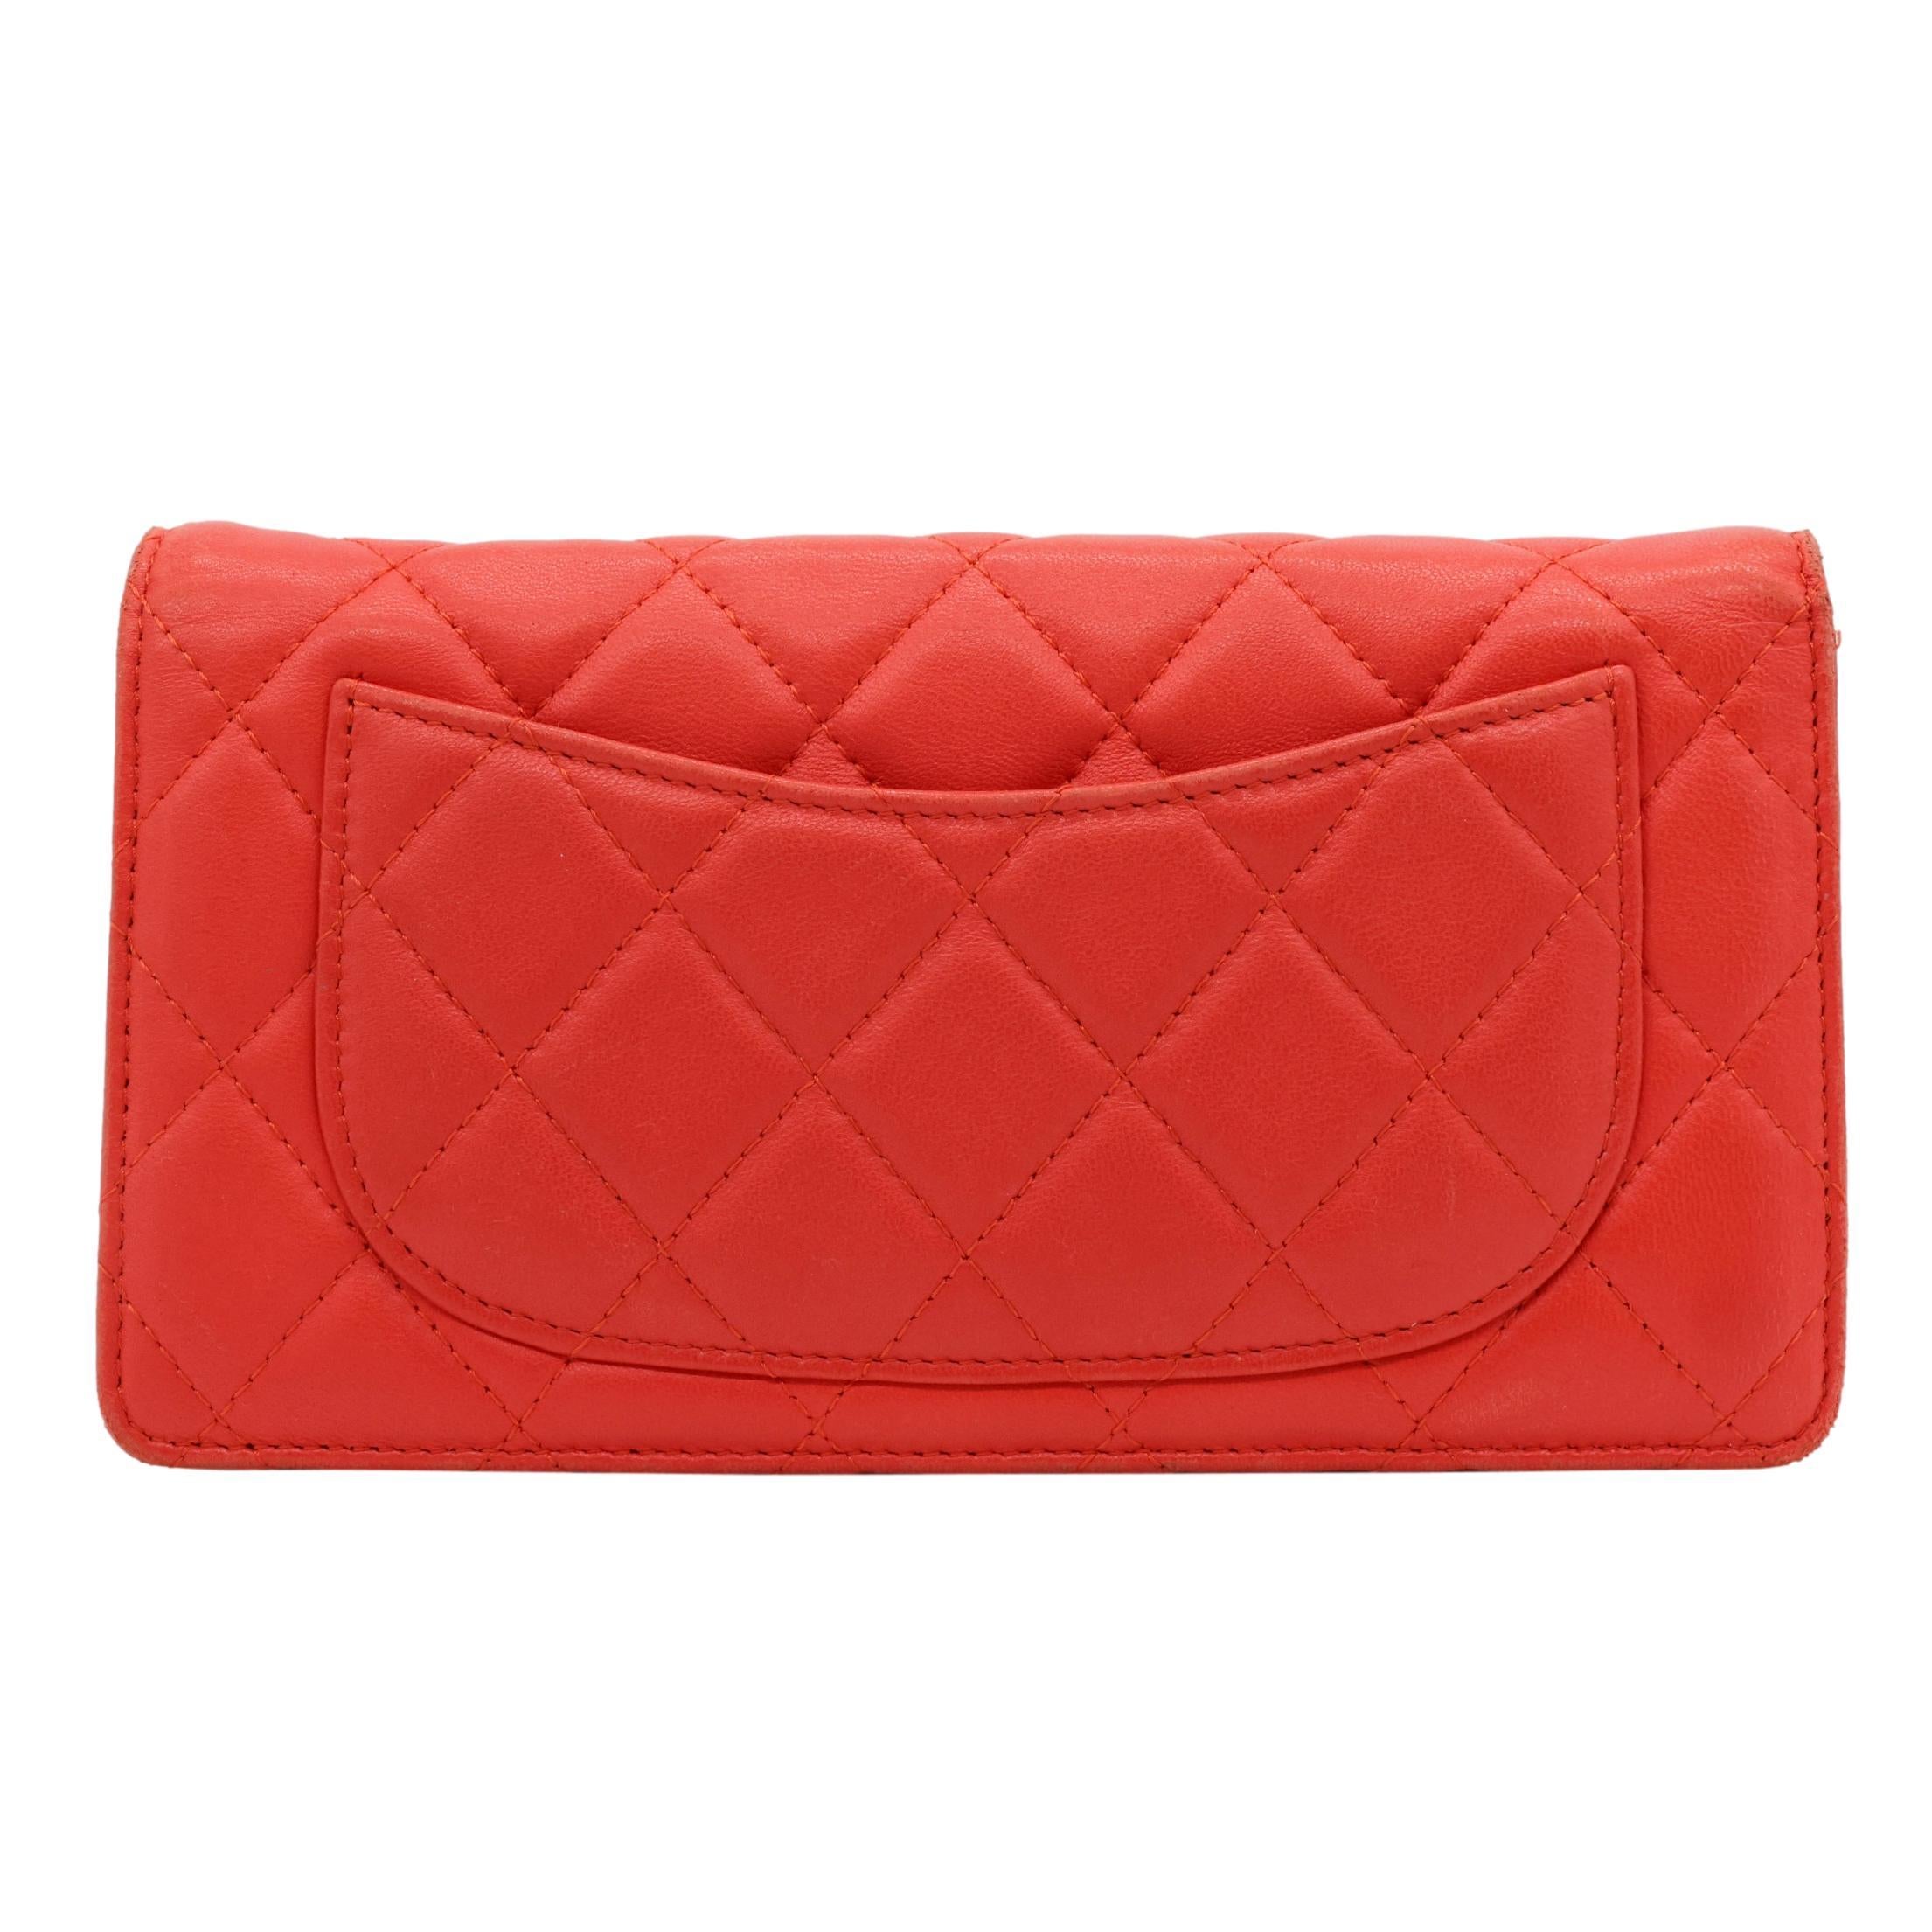 Chanel Quilted Coral Lambskin Leather Yen Continental Wallet, 2009 - 2010. 2